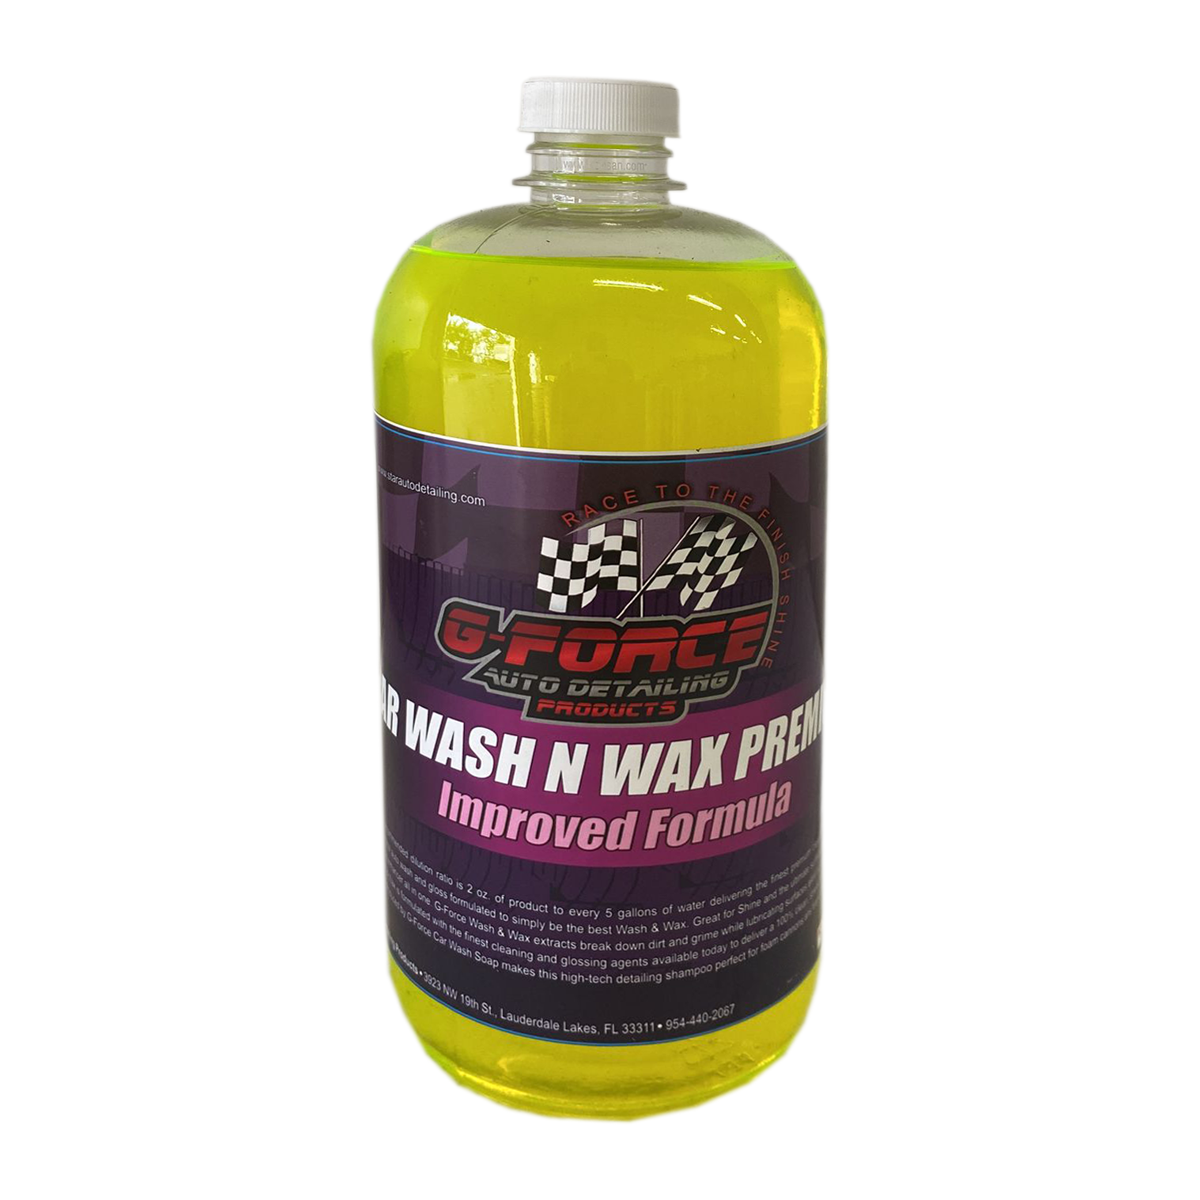 LIQUID WAX for quick shine – G Force Auto Detailing Products